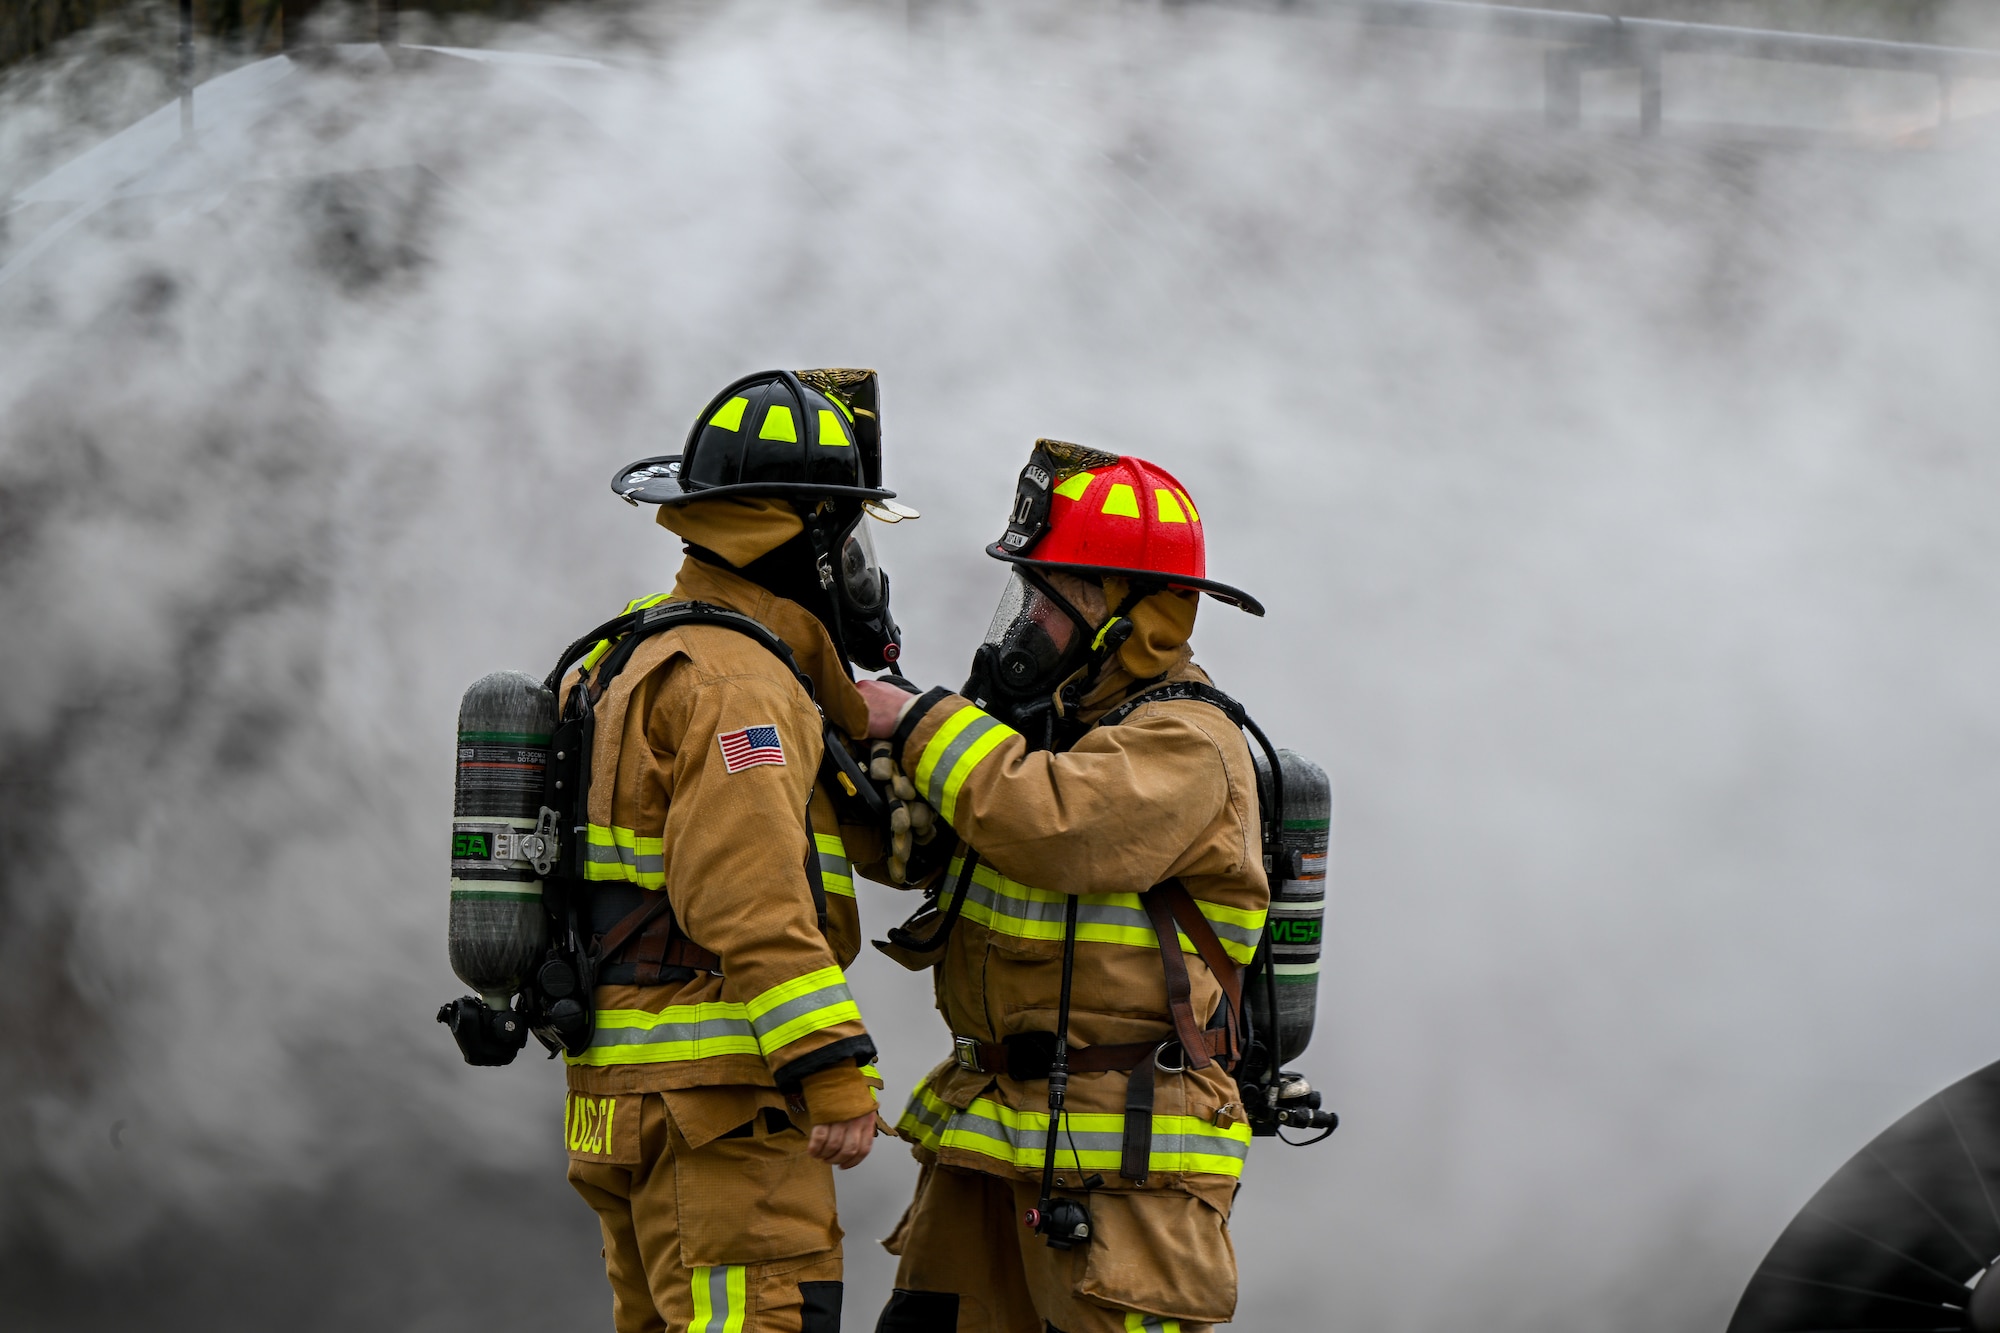 Youngstown Air Reserve Station fire captain John West helps firefighter Mike Sanducci adjust his gear while responding to a mock aircraft crash at the firefighter training area during an exercise at Youngstown Air Reserve Station, Ohio, April 25, 2024.